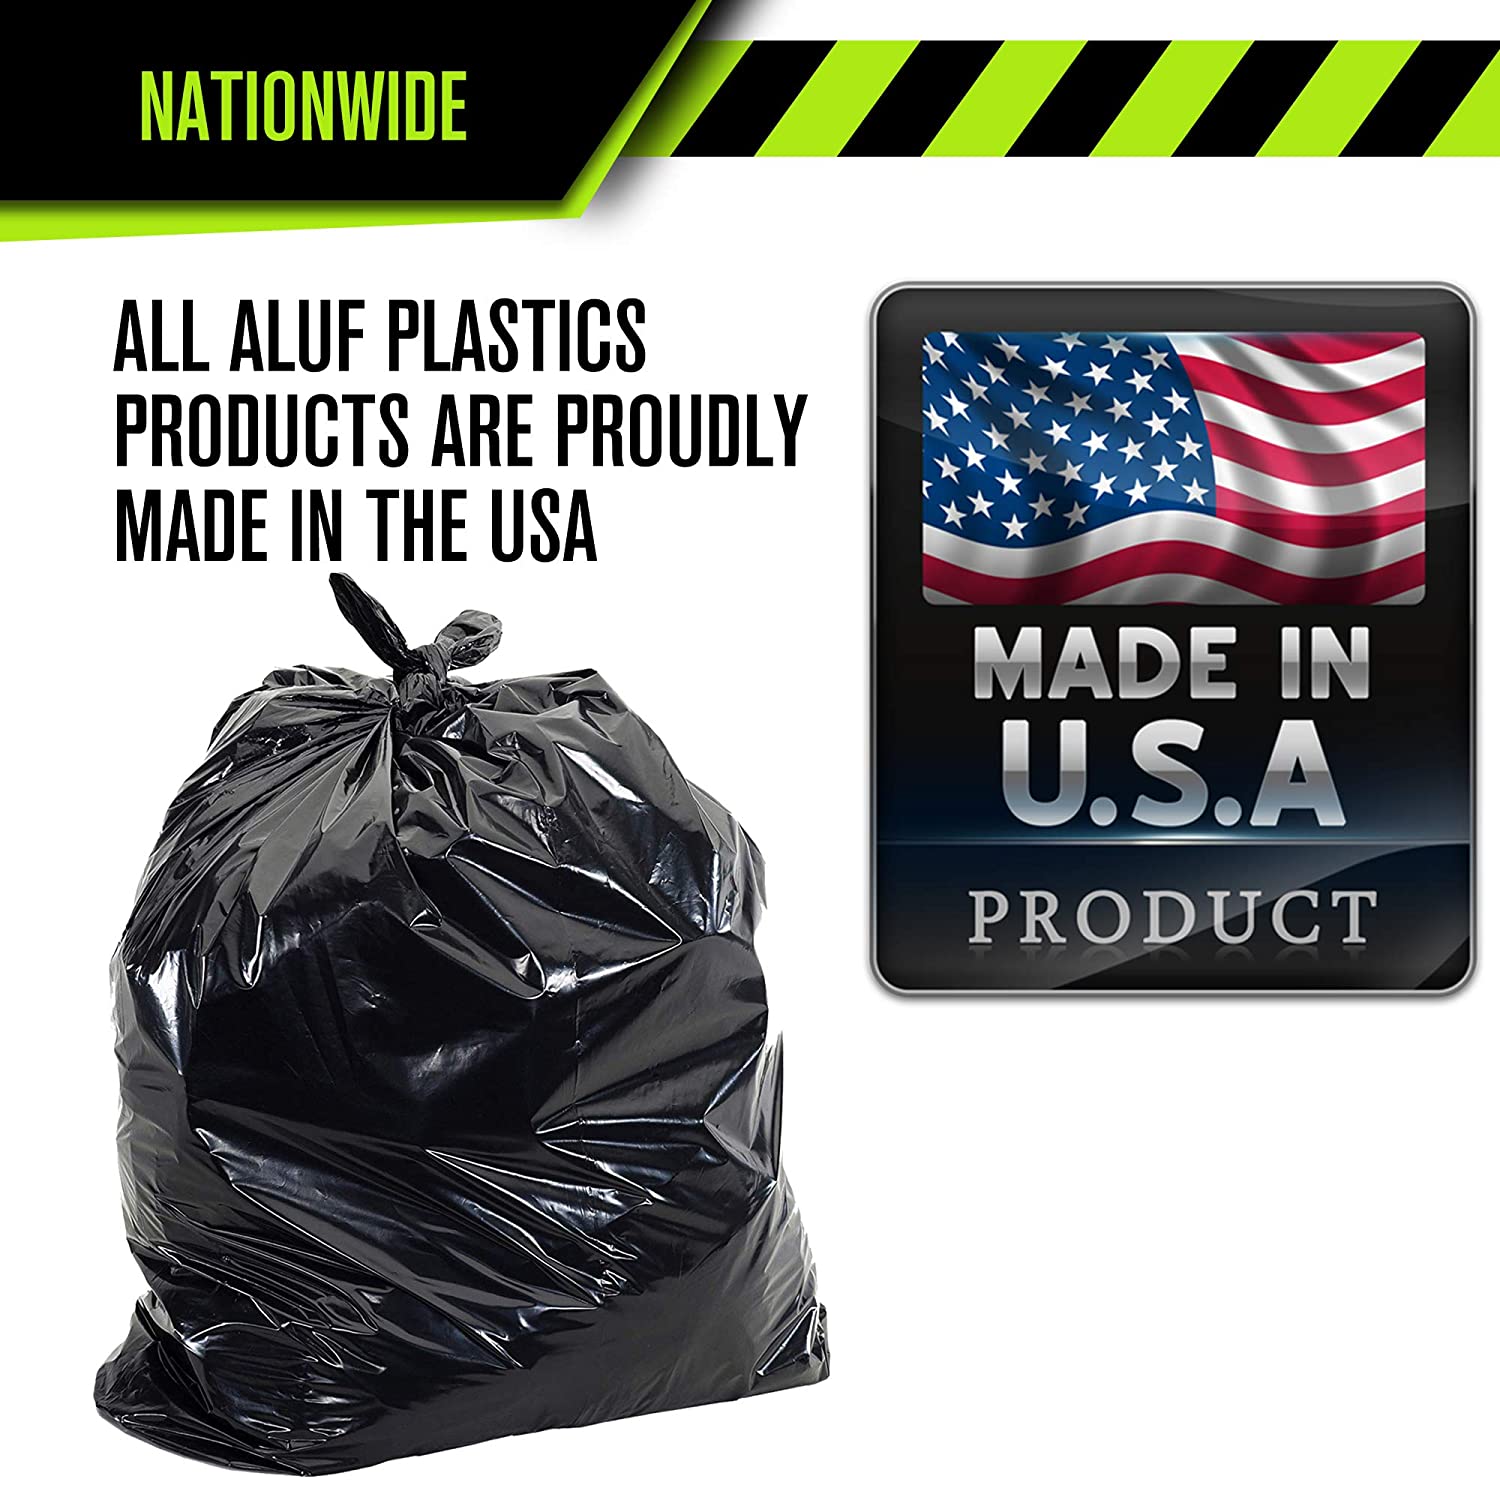 Reli. 95-96 Gallon Trash Bags Heavy Duty | 68 Bags | Extra Large 90, 95,  96, 100 Gallon Can Liners | Black | Huge/Big Trash Bags | Made in USA